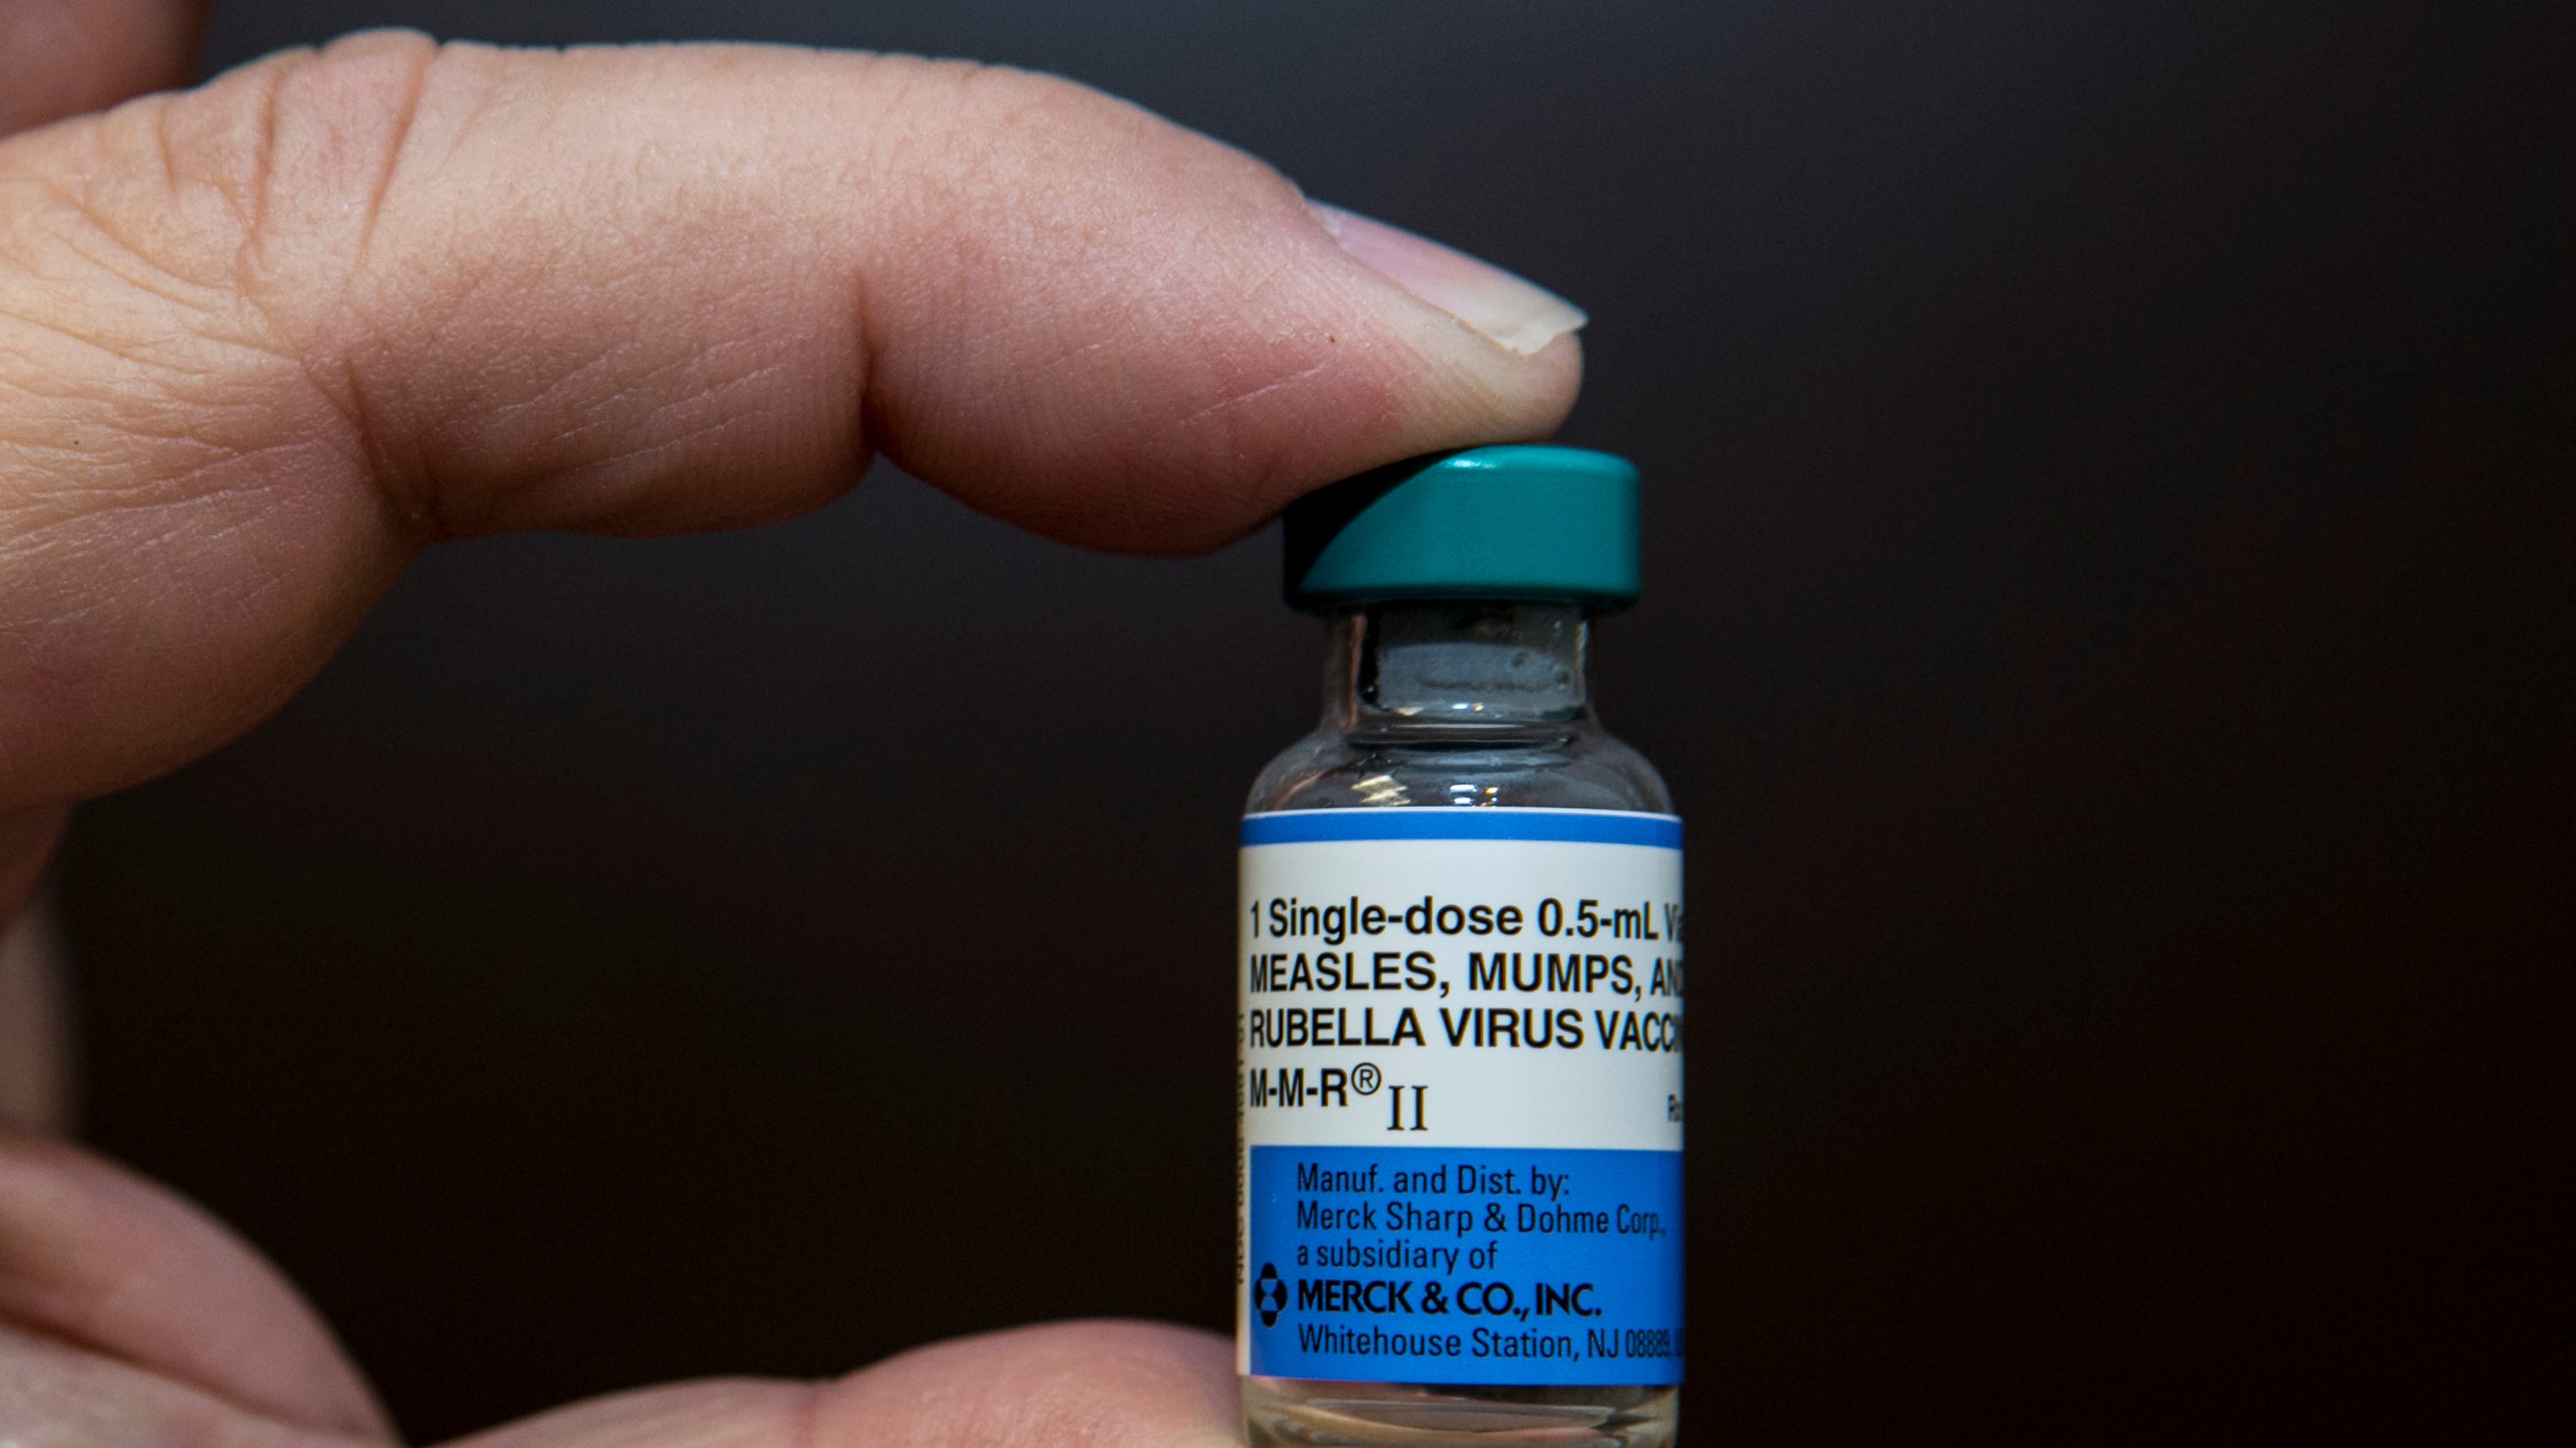 vaccines-ended-1989-measles-outbreak-now-we-must-fight-disinformation